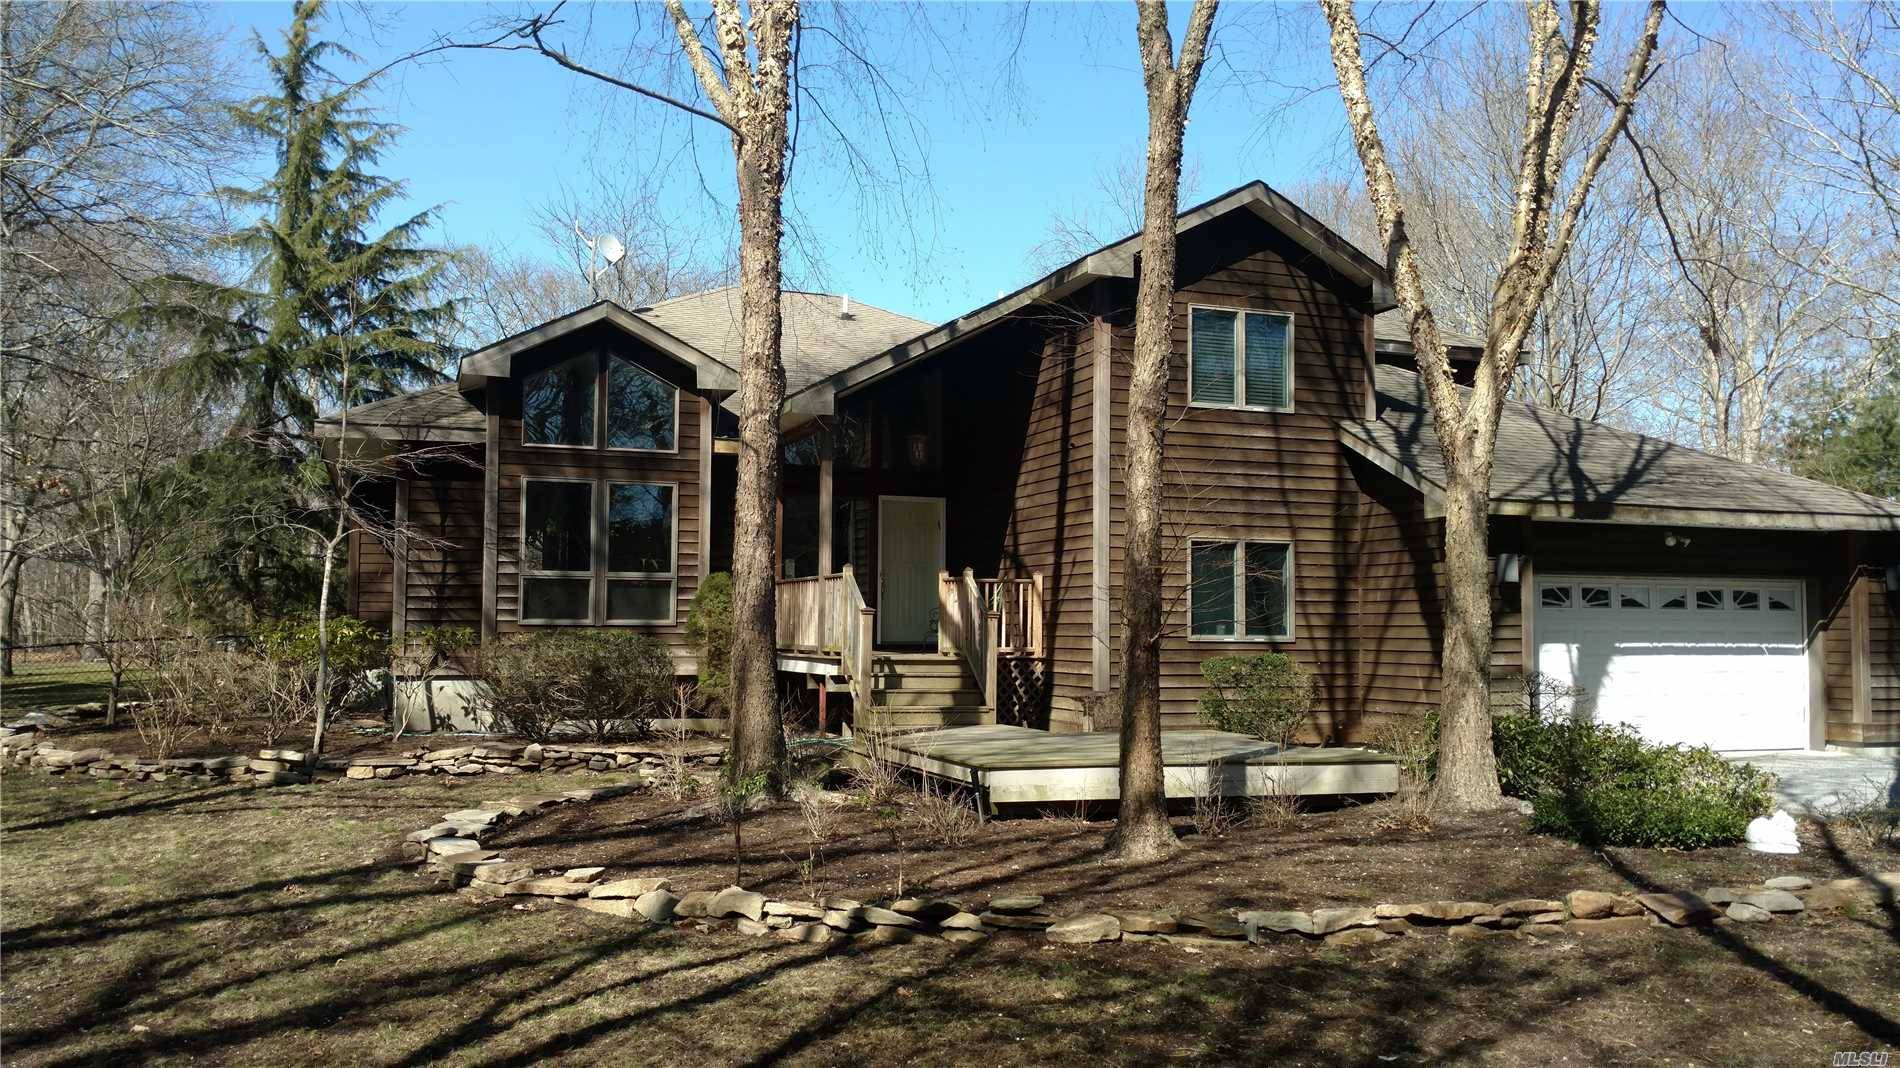 Pristine And Private 4 Bedroom Cedar-Sided Home On A Secluded Cul-De-Sac.